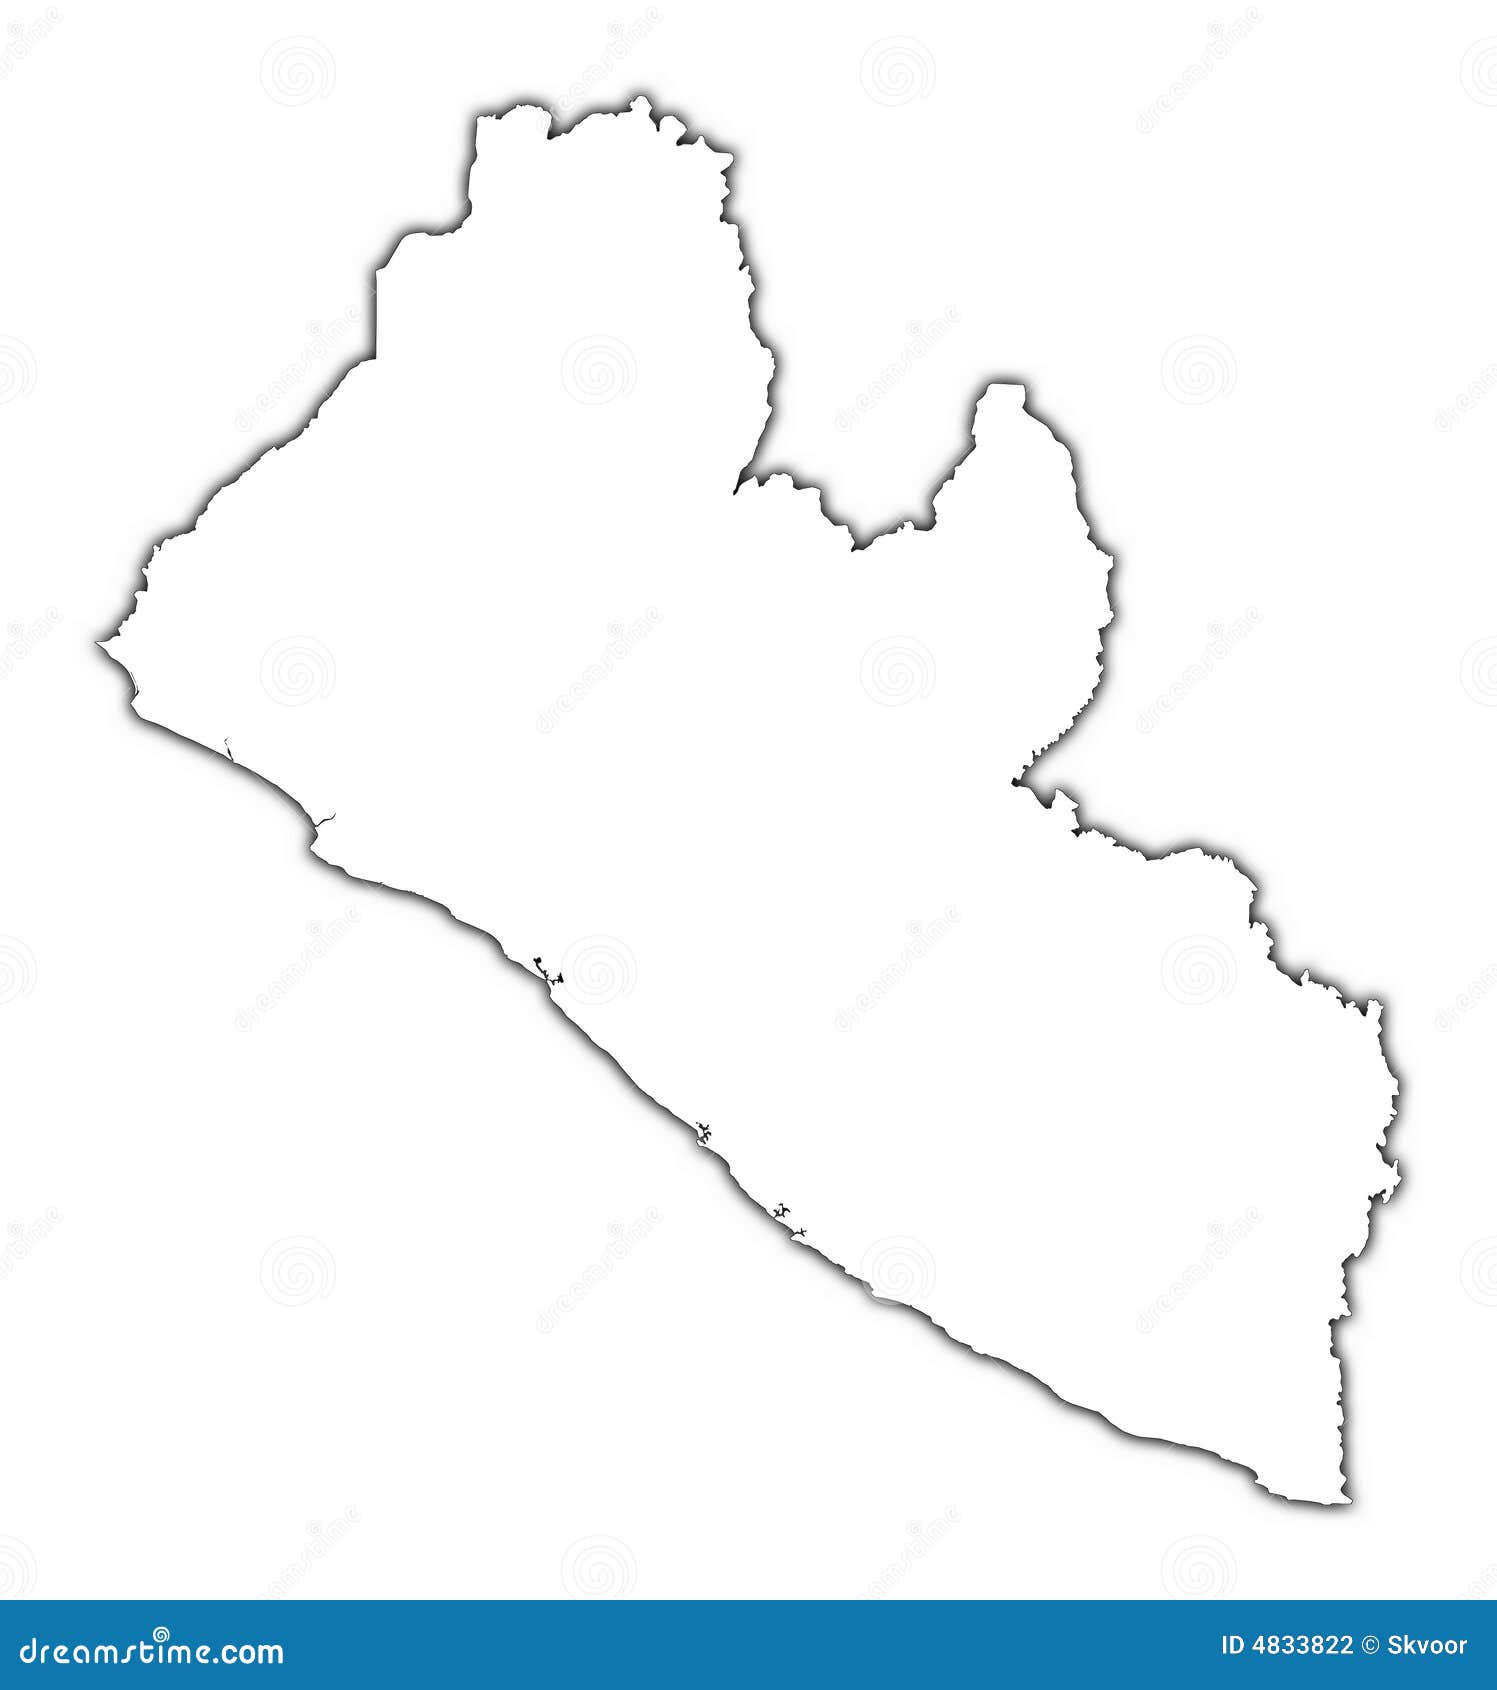 Unique Draw A Sketch Map Of Liberia for Beginner